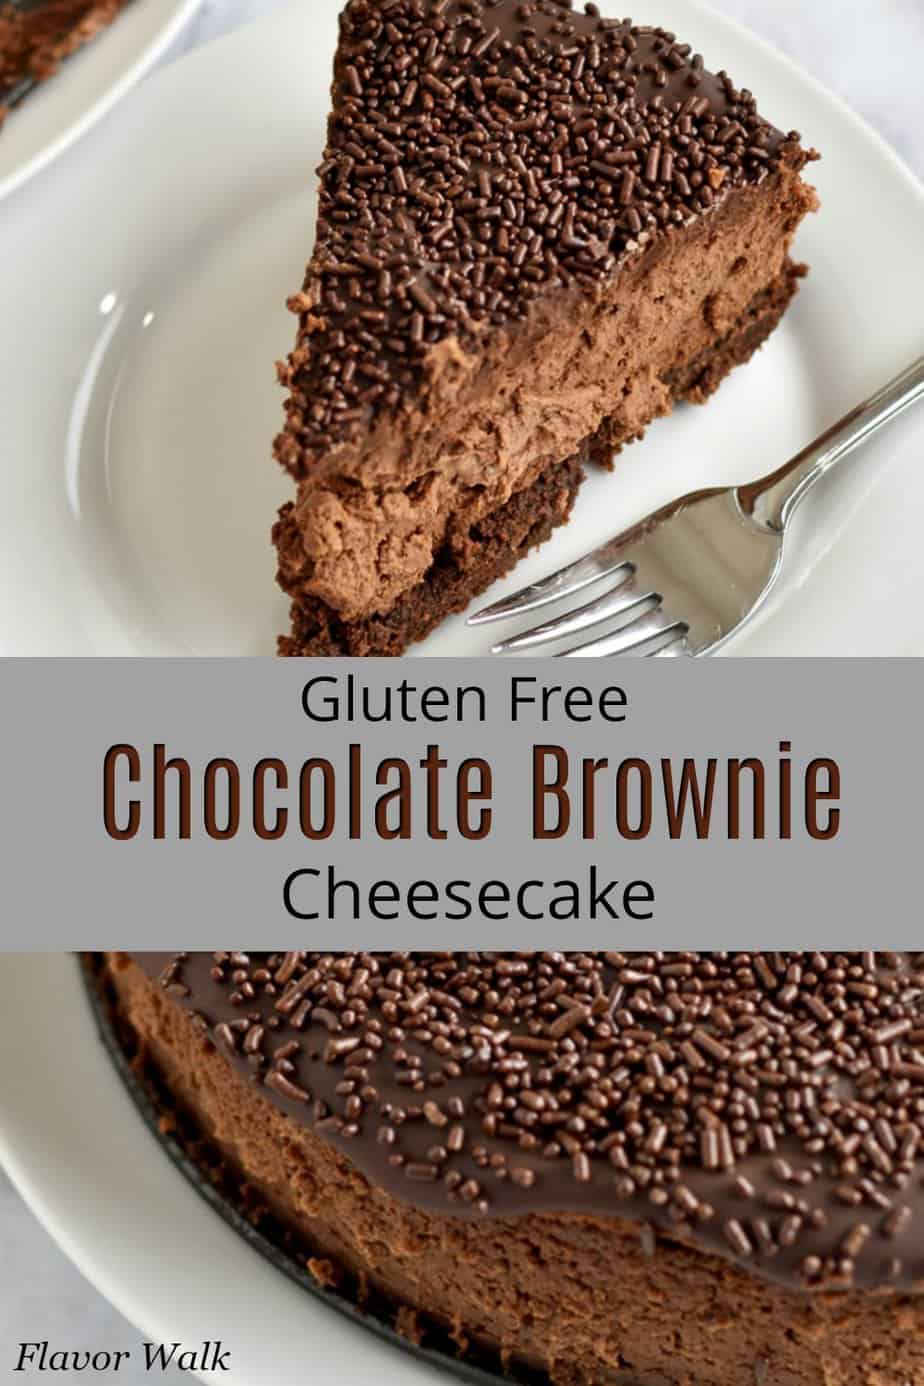 Top image is slice of gluten free chocolate brownie cheesecake with fork on white plate, middle image is gray text overlay, bottom image is close up view of the side of the whole cheesecake.